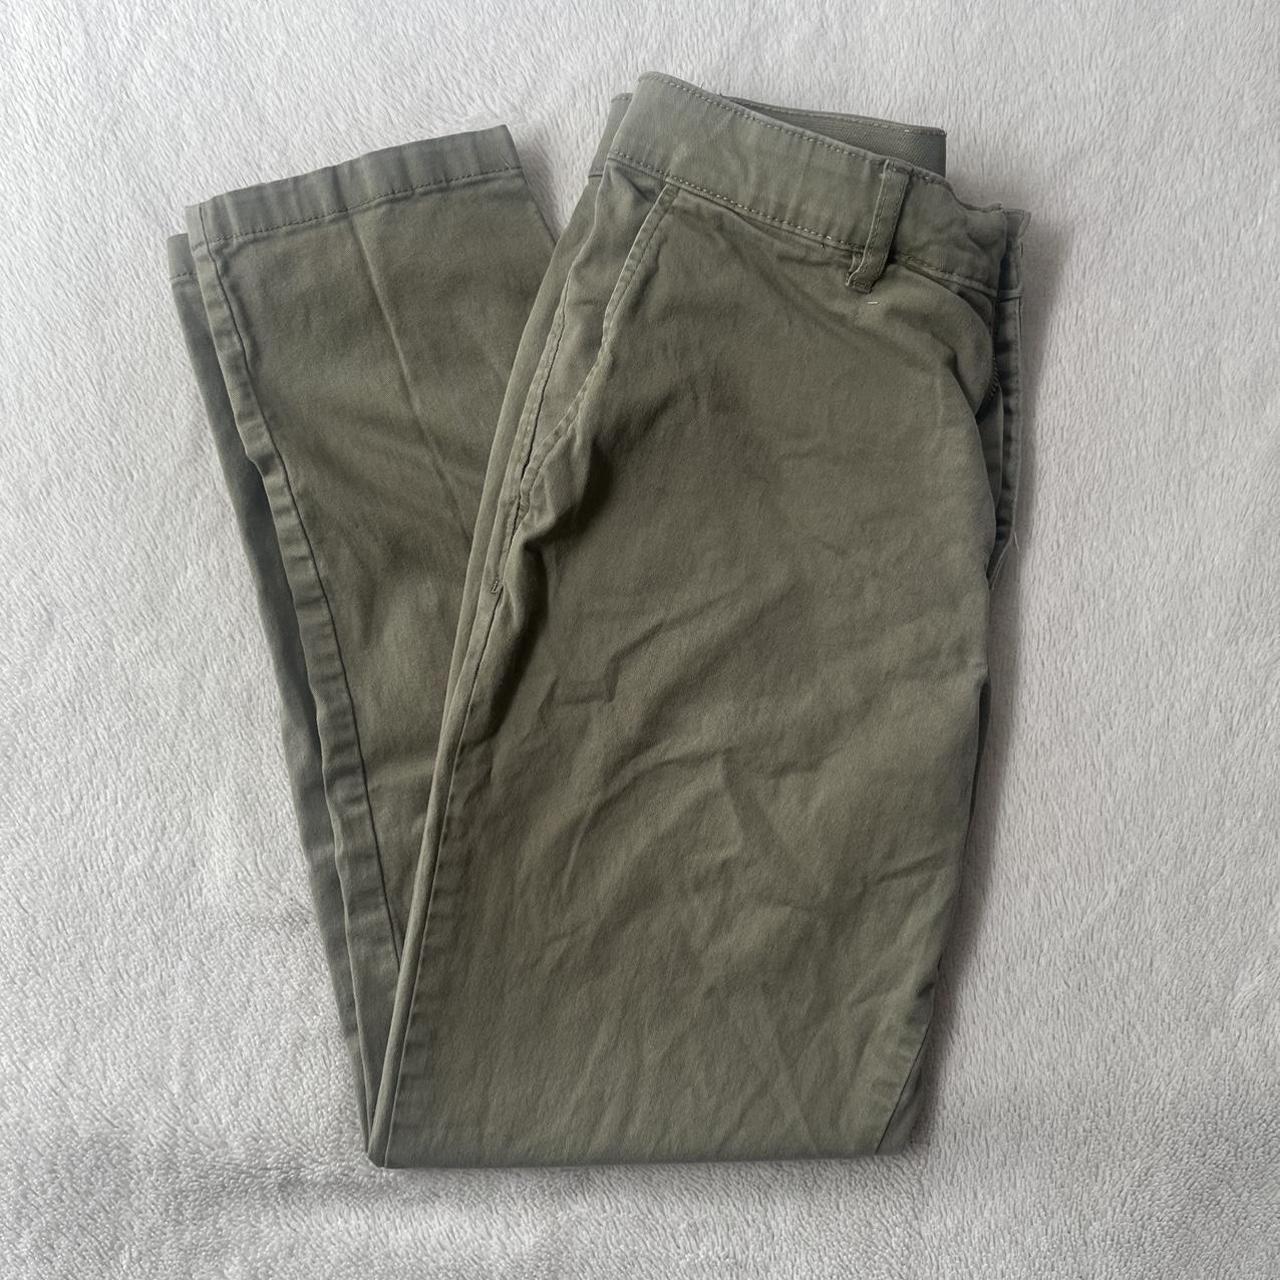 H&M Olive Green Slim Fit Chino Pants Size-... - Depop